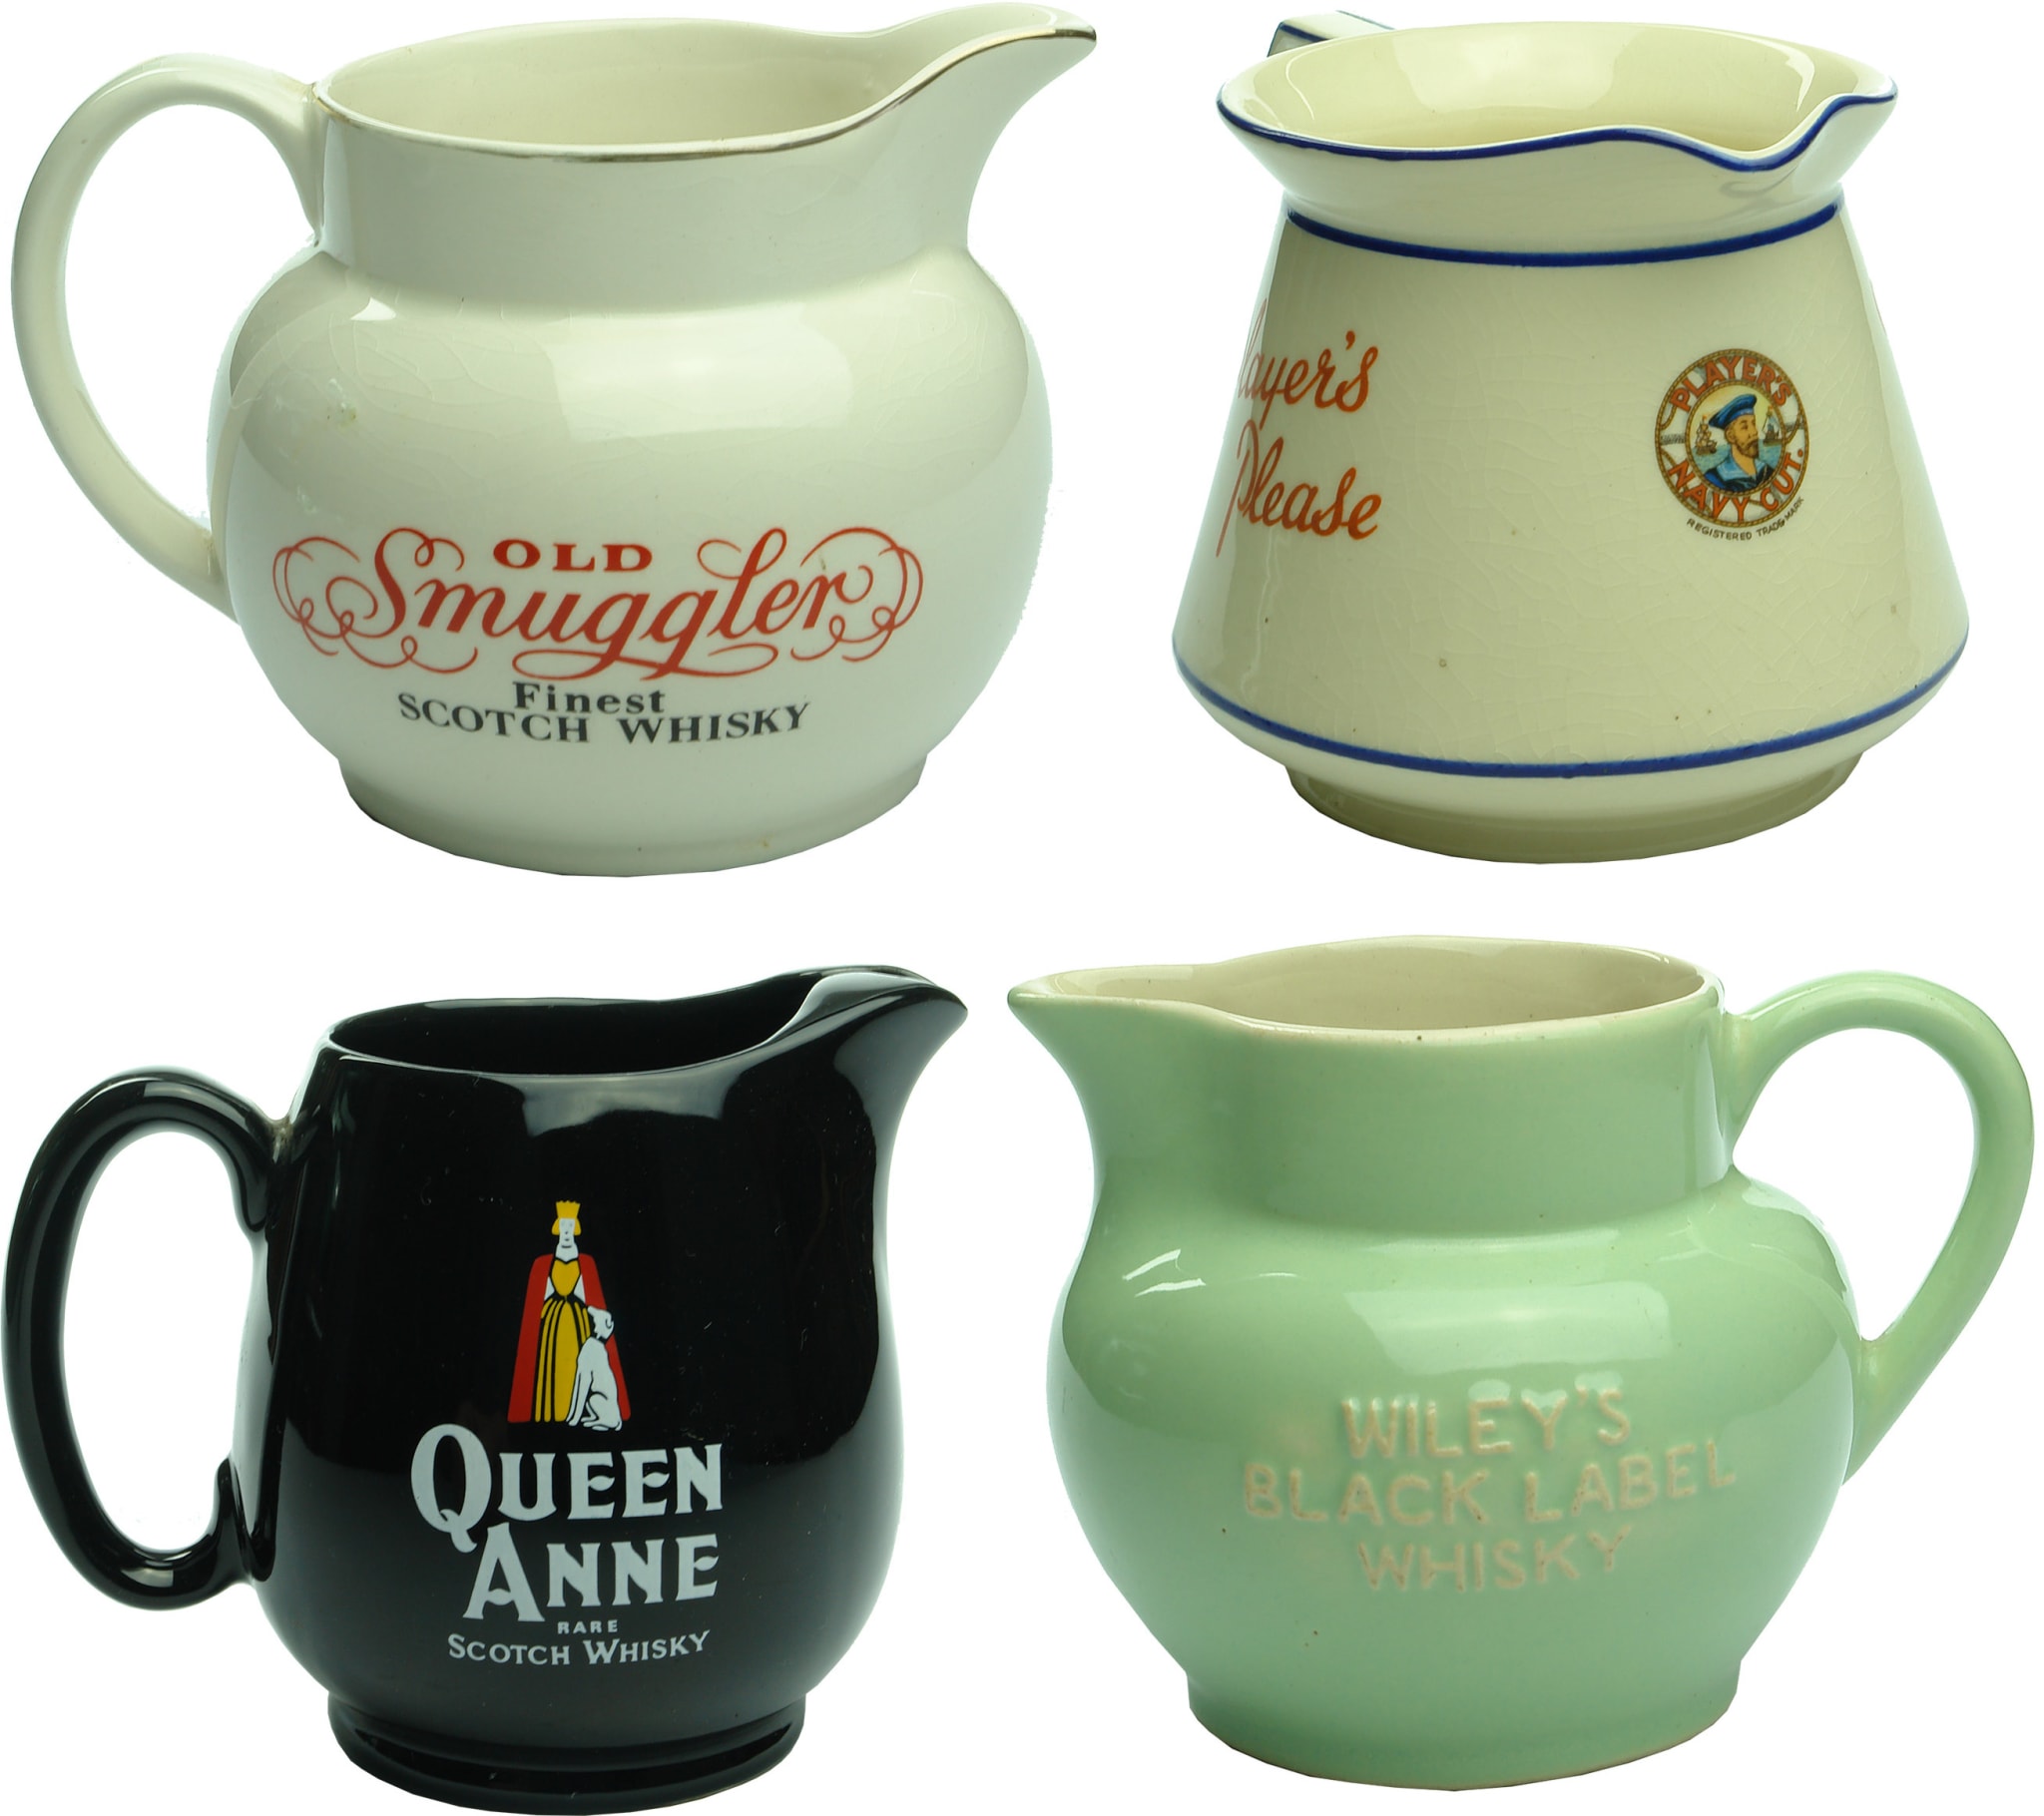 Old Scotch Whisky Jugs Advertising